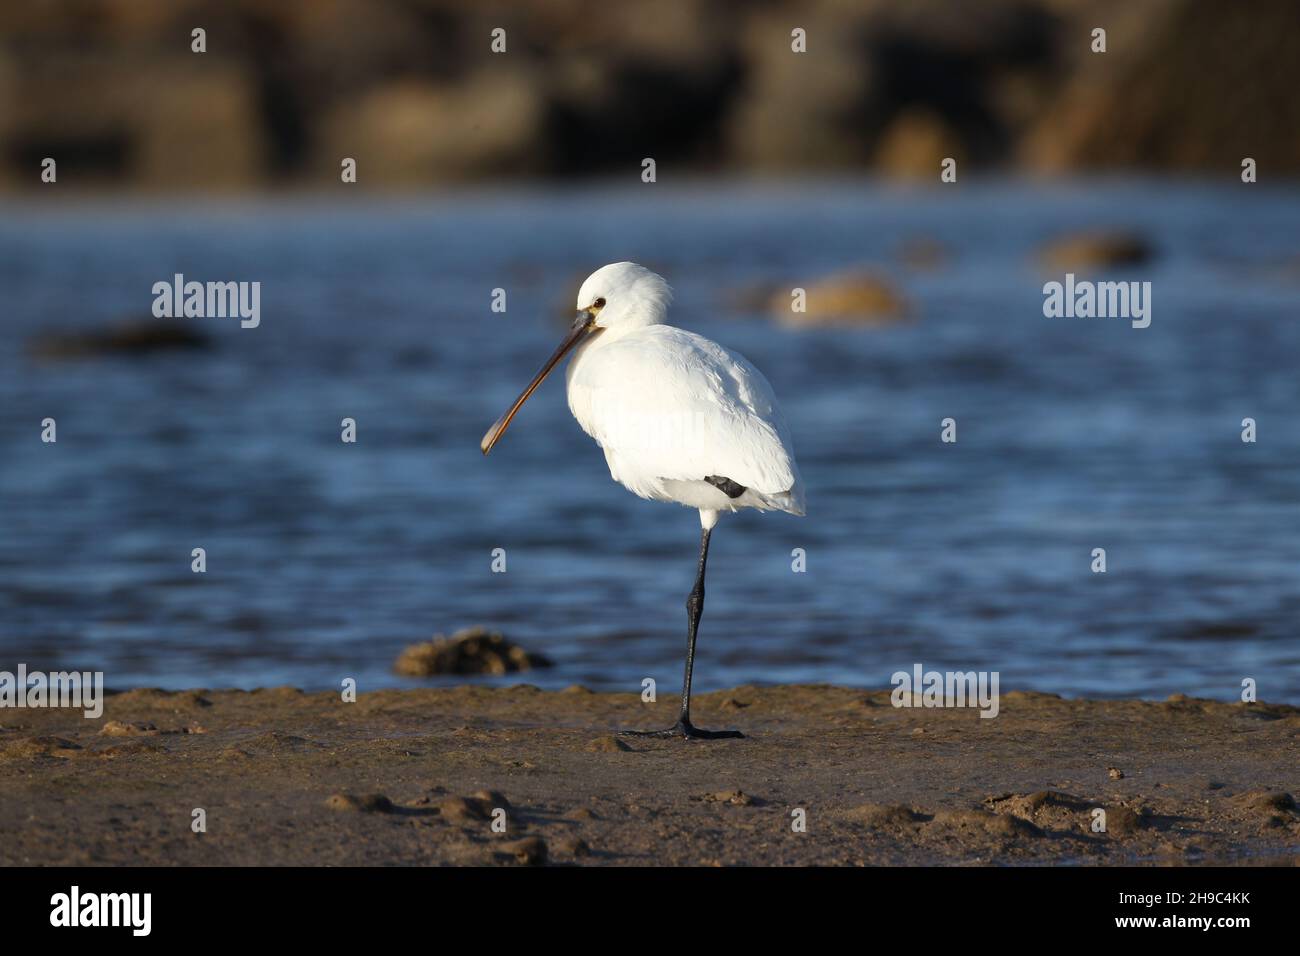 There are a number of spoonbill on Lanzarote where they Winter and migrate through other seasons.  A large white aquatic bird with spoon shaped bill. Stock Photo